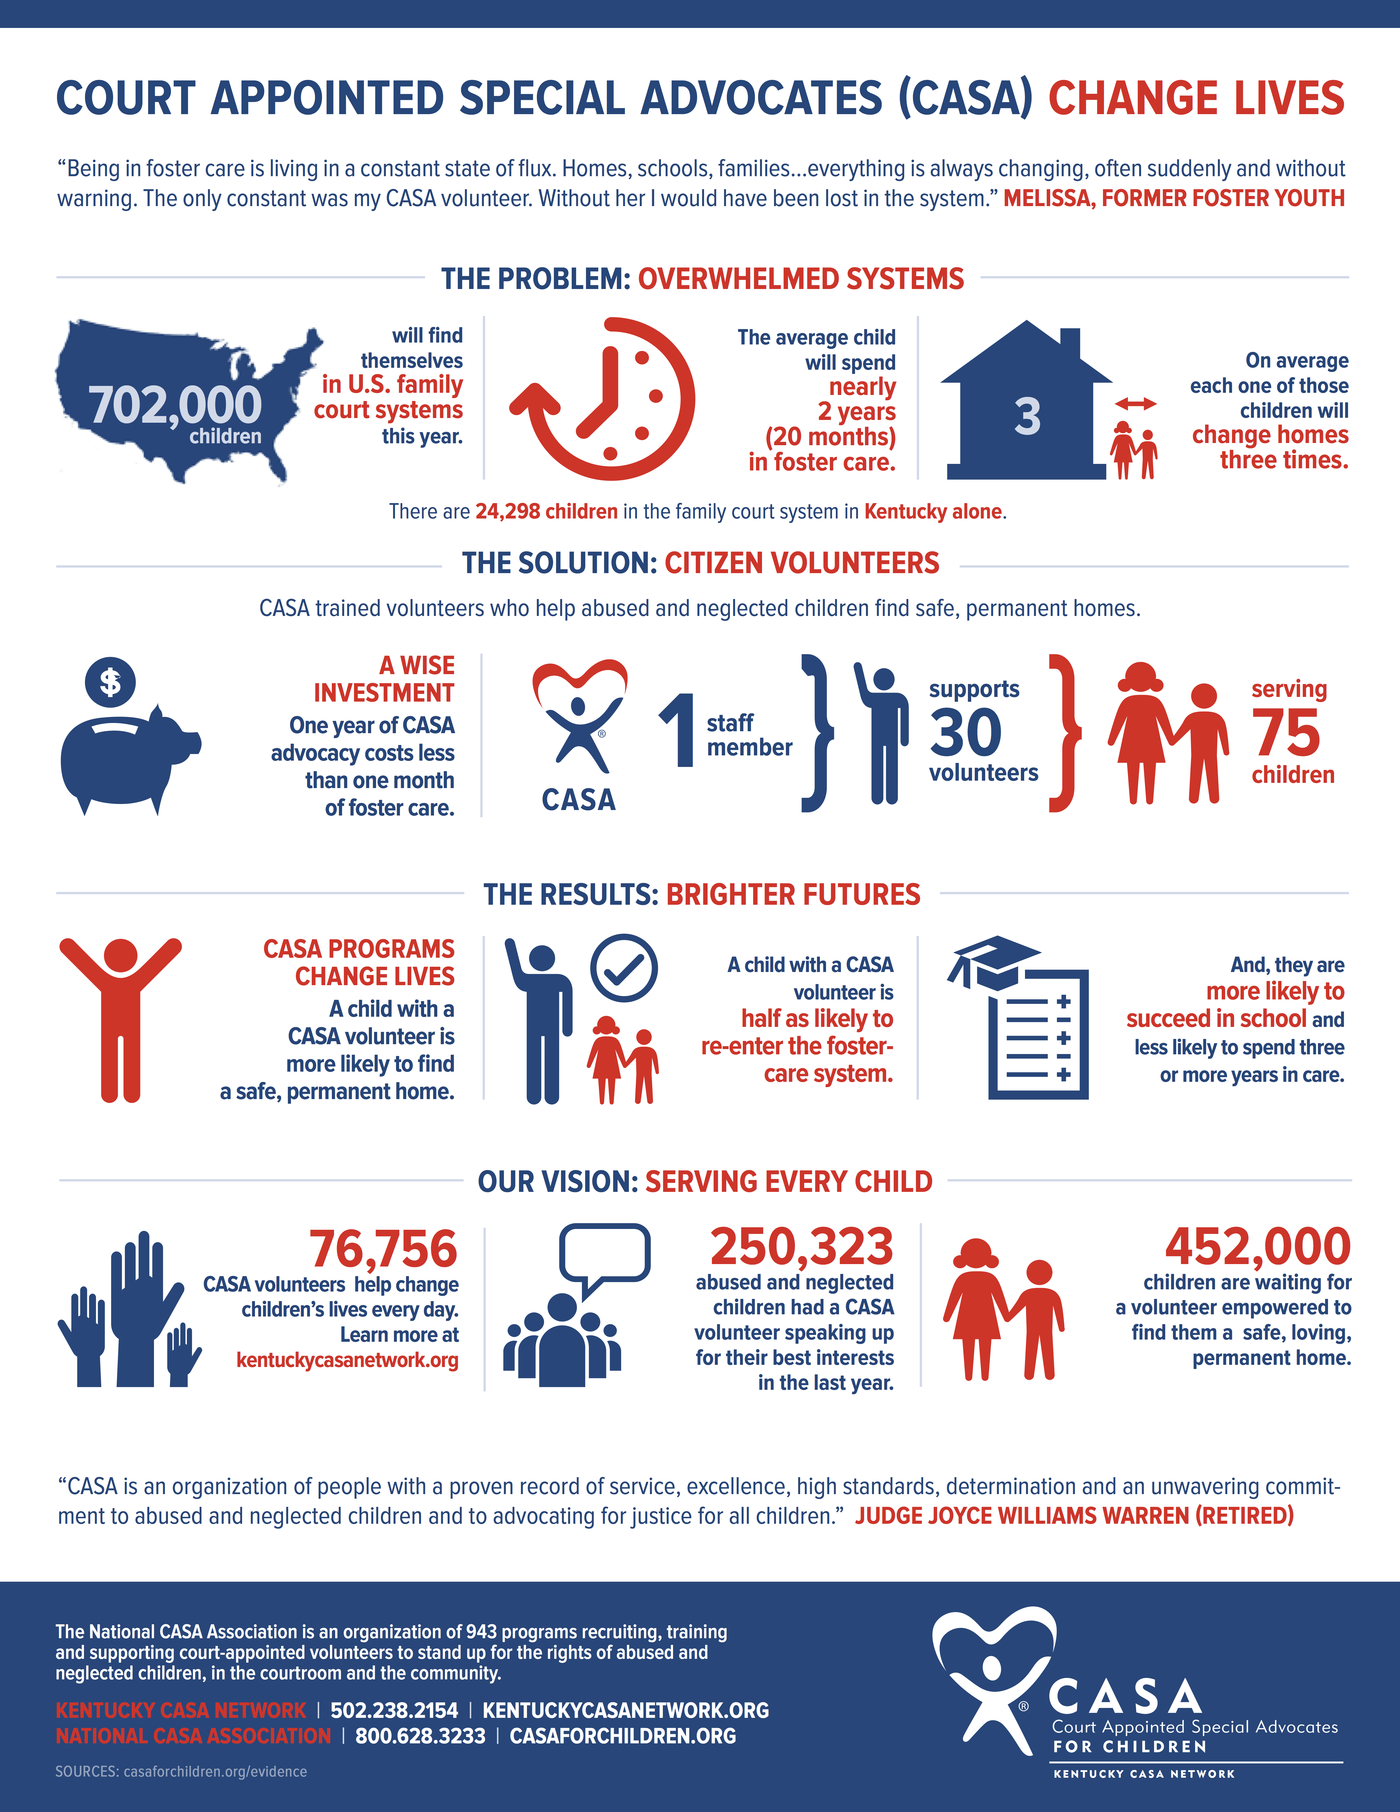 Kentucky CASA Network Infographic. 702,000 children will find themselves in family court systems this year. There are 24,298 children in the family court system in Kentucky alone.